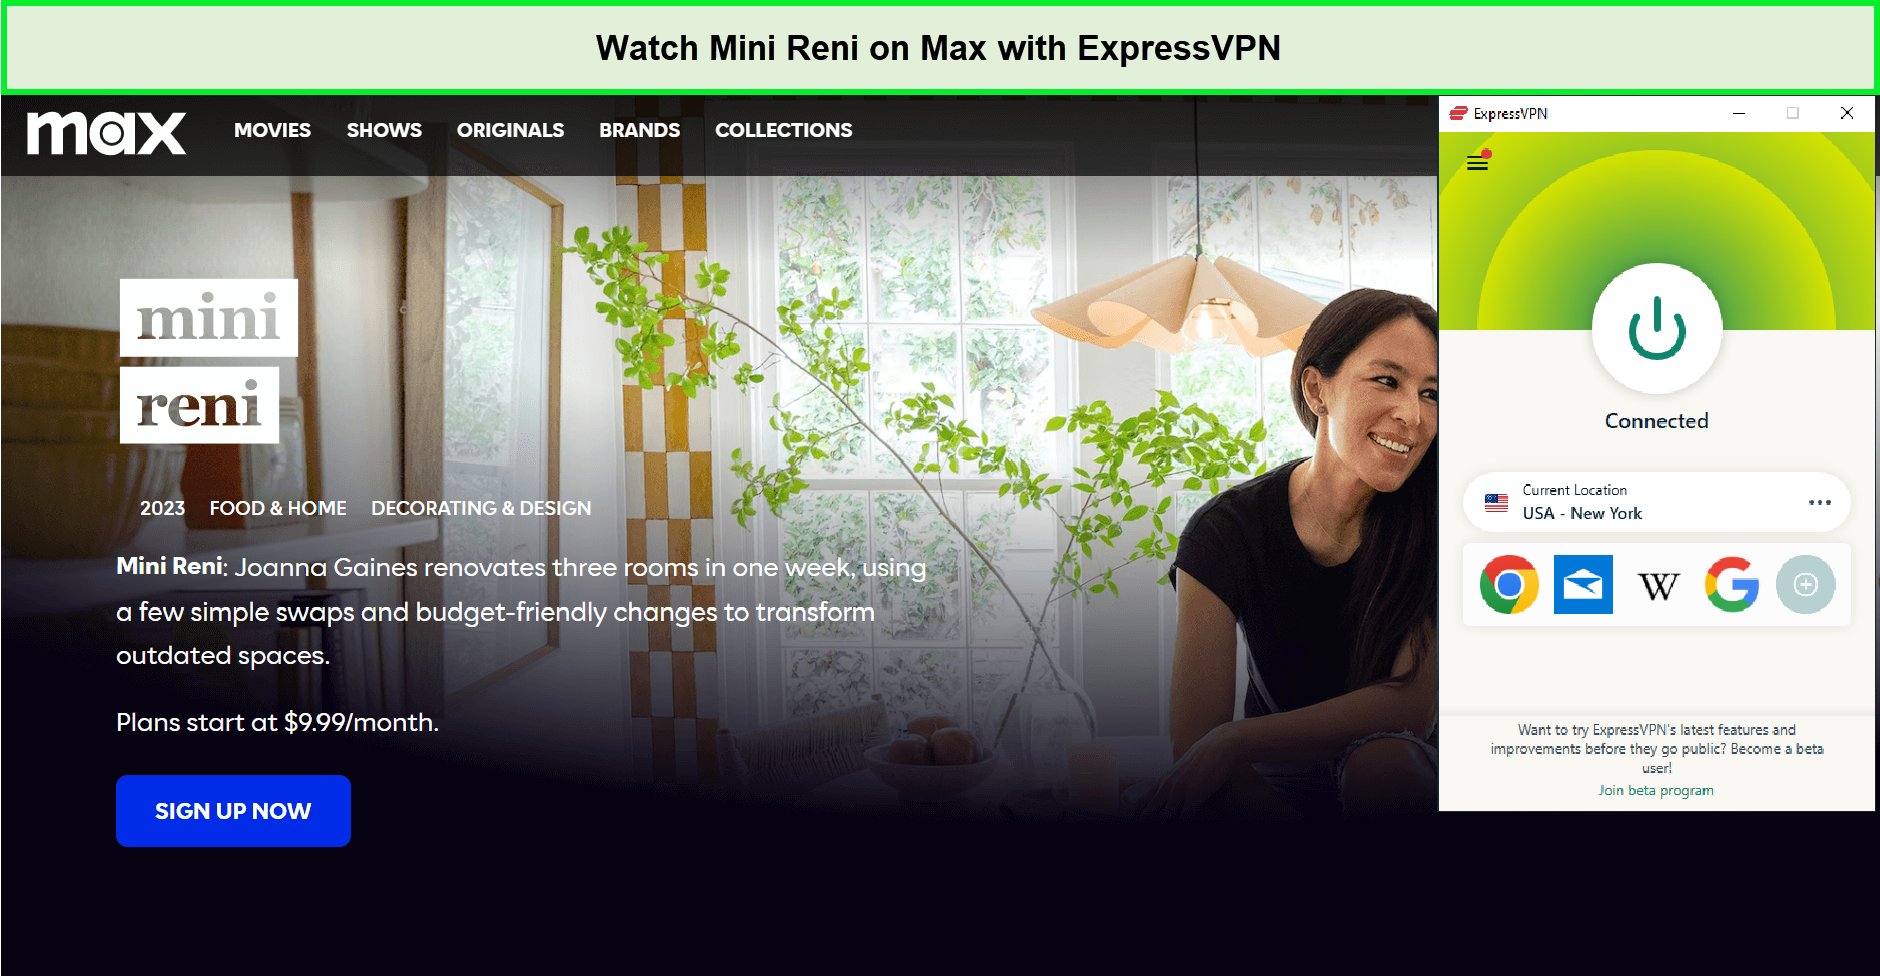 Watch-Mini-Reni-in-France-on-Max-with-ExpressVPN